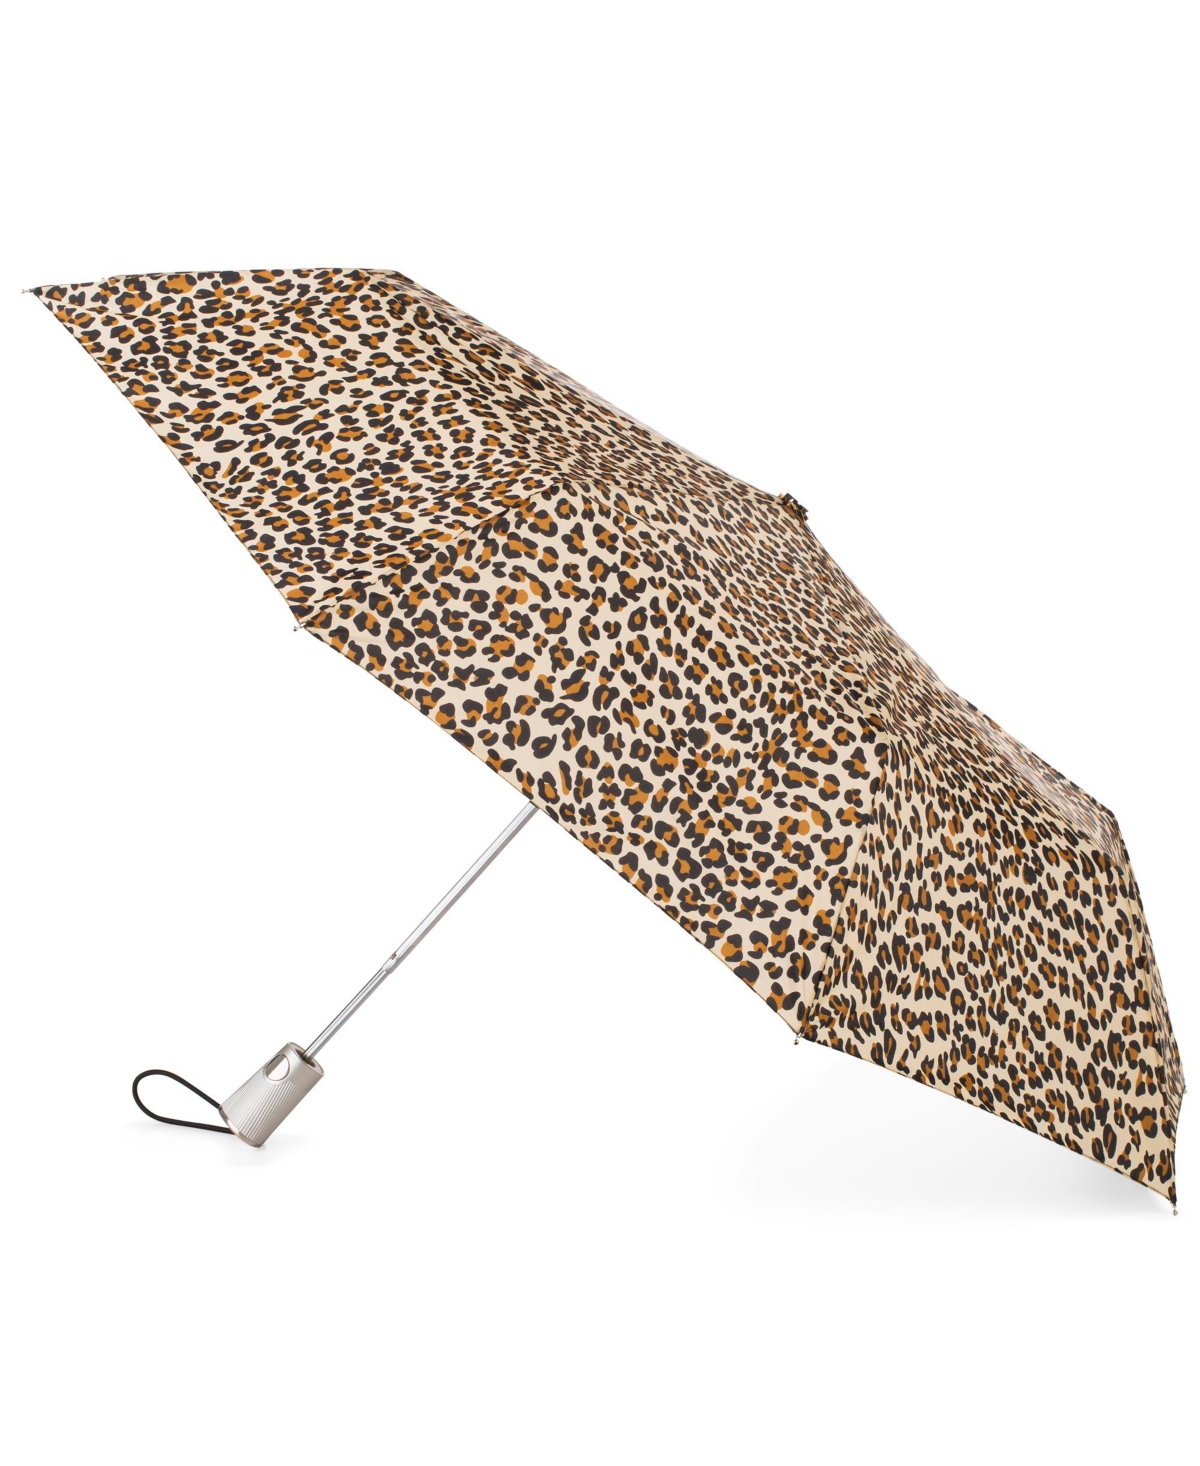 Shop Totes Auto Open Umbrella With Water Repellent Technology In Leopard Sp